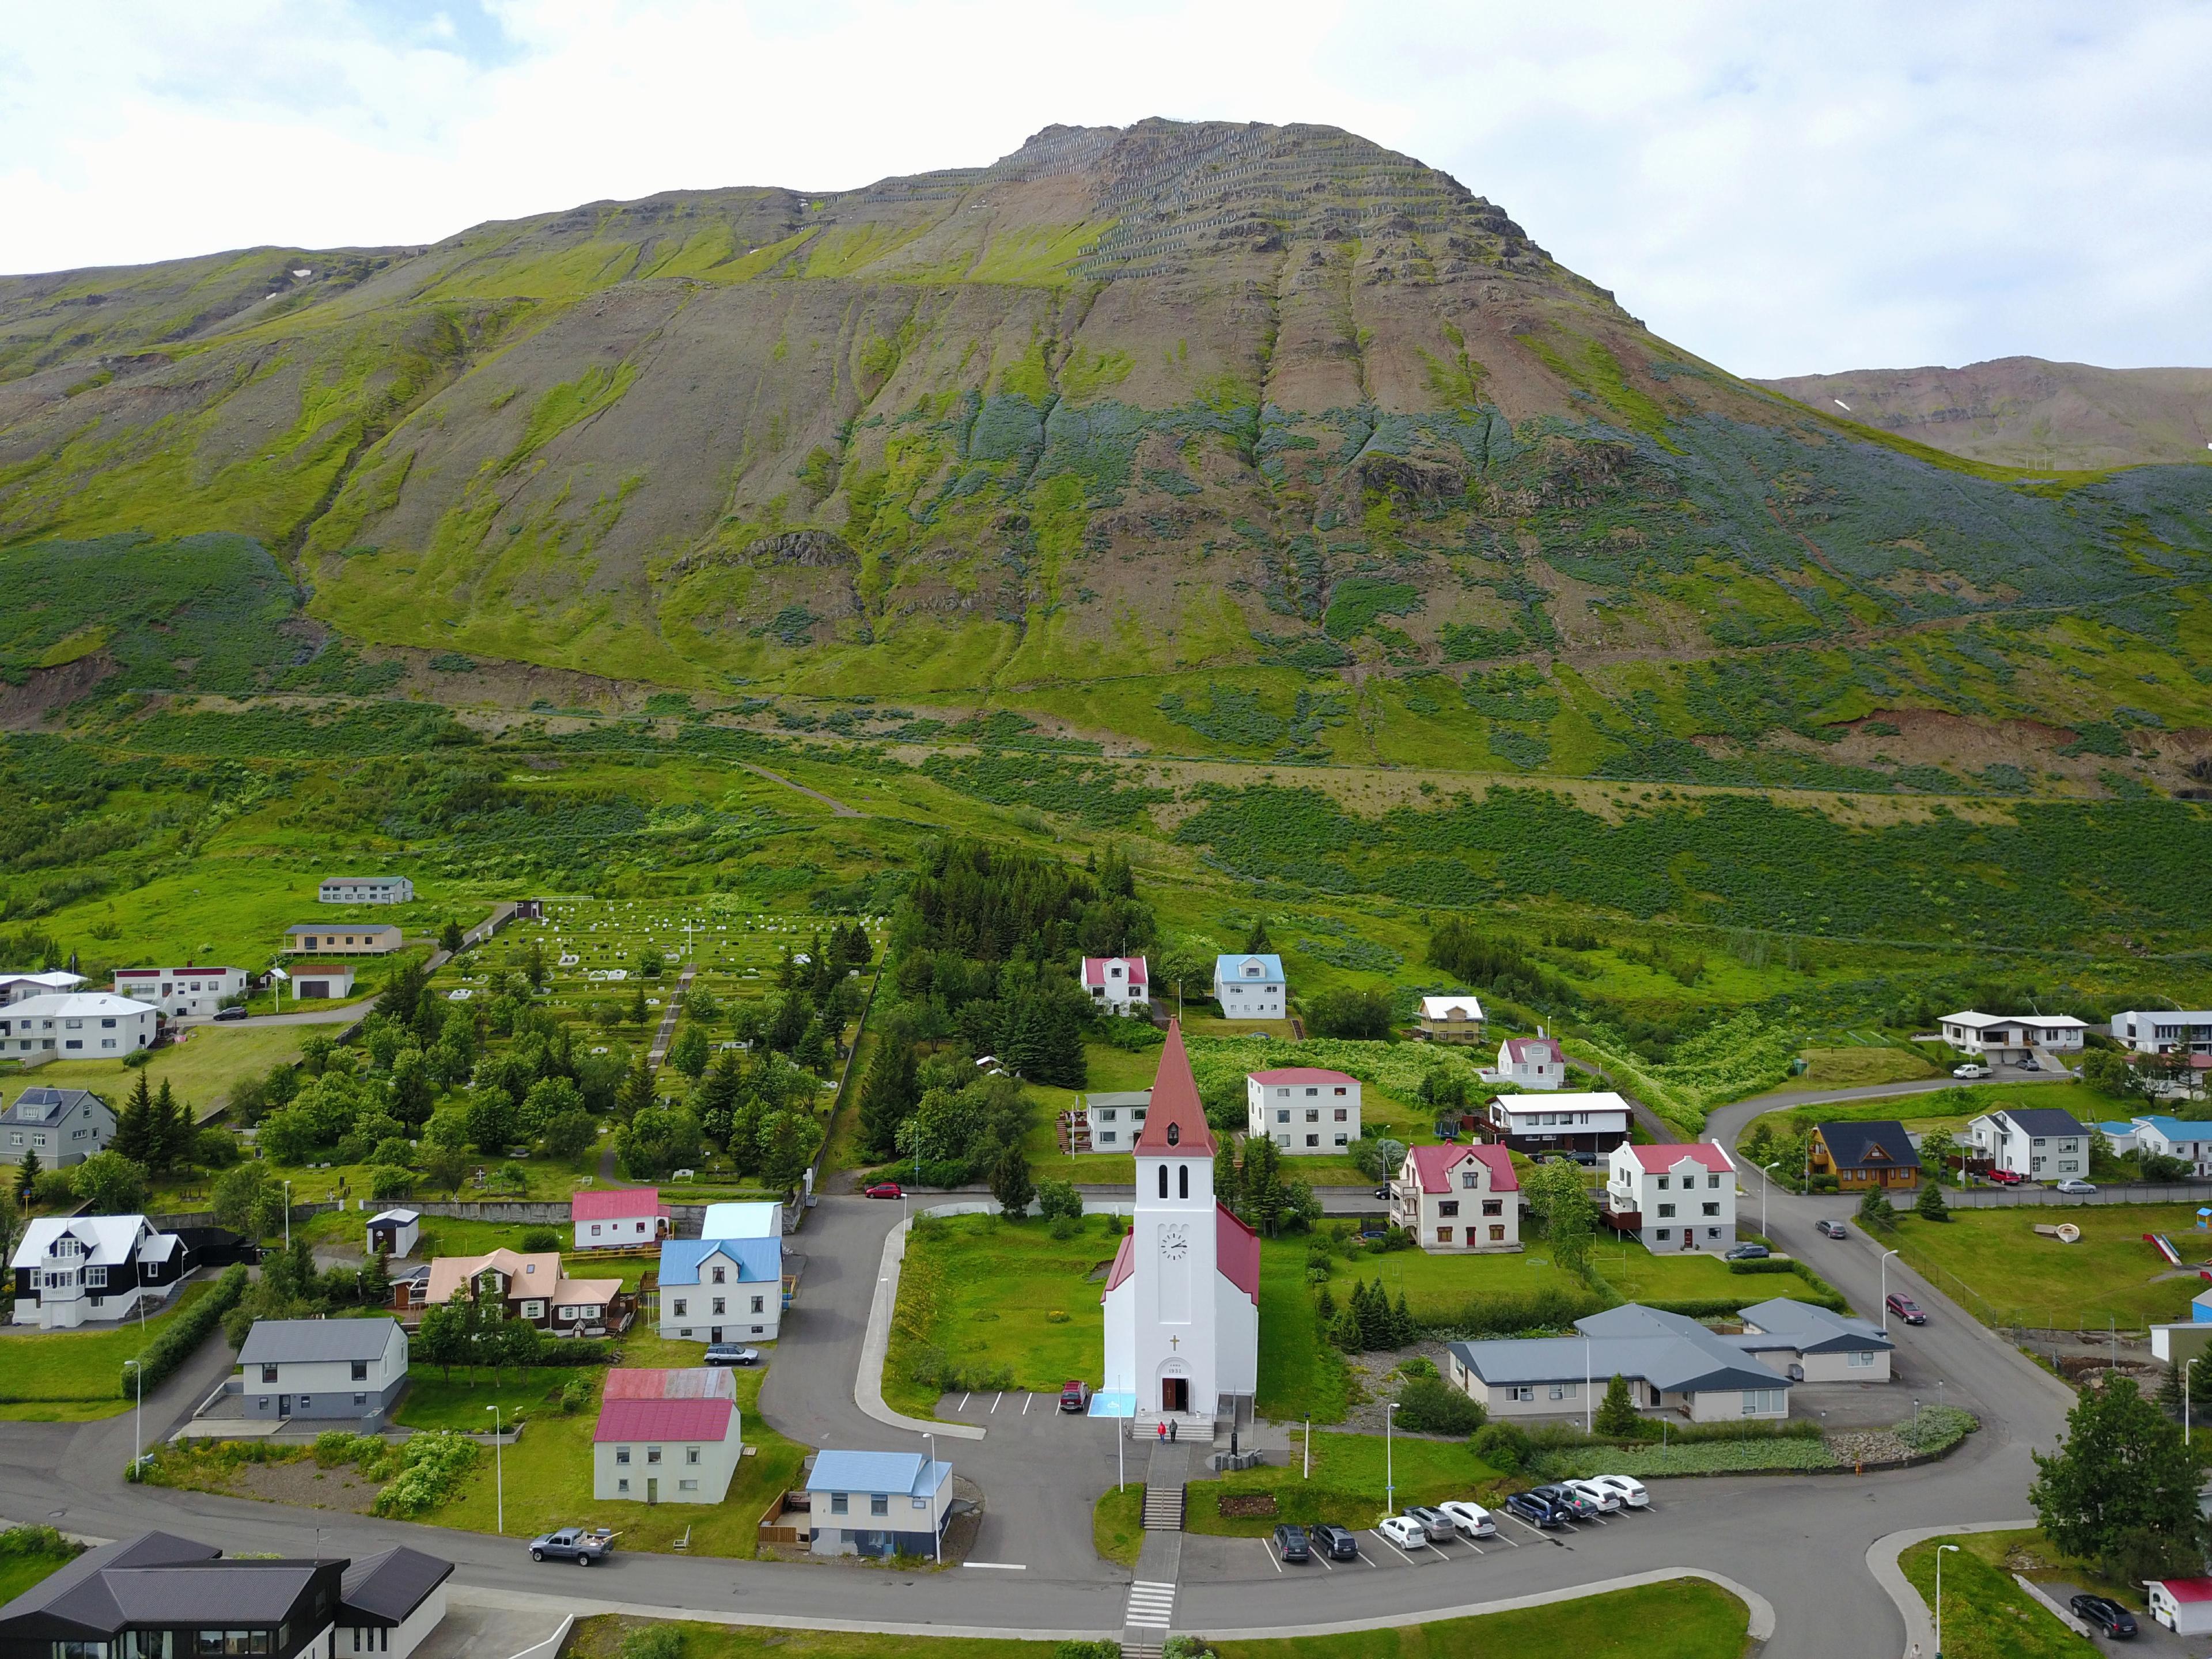 Aerial view of a quaint small town featuring a picturesque church at its center.